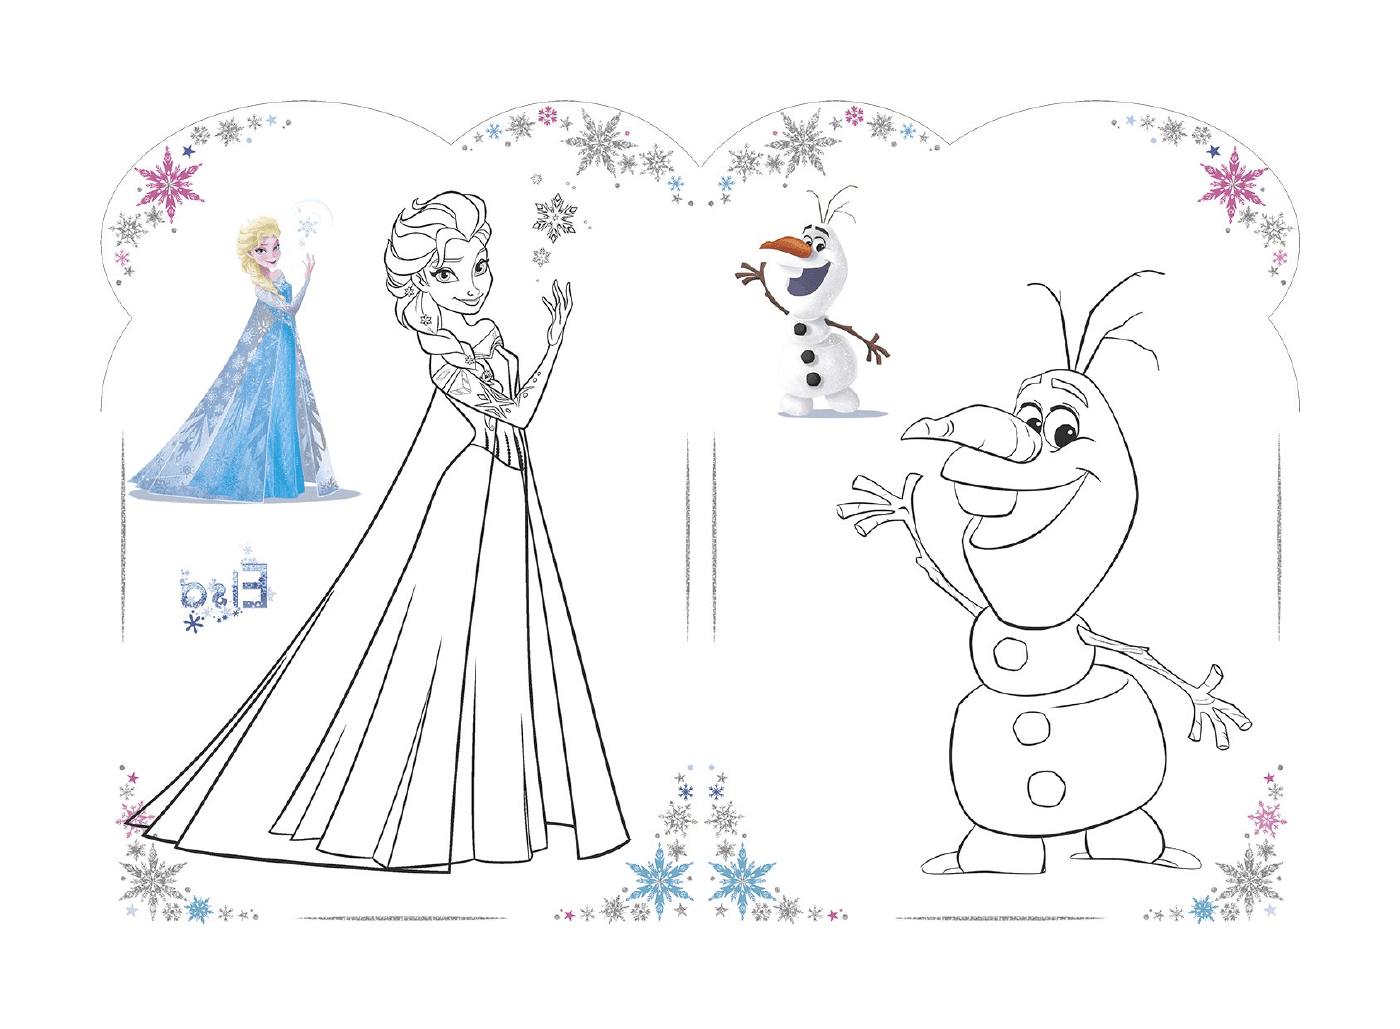  Olaf and Elsa by Disney's Snow Queen in 2018 